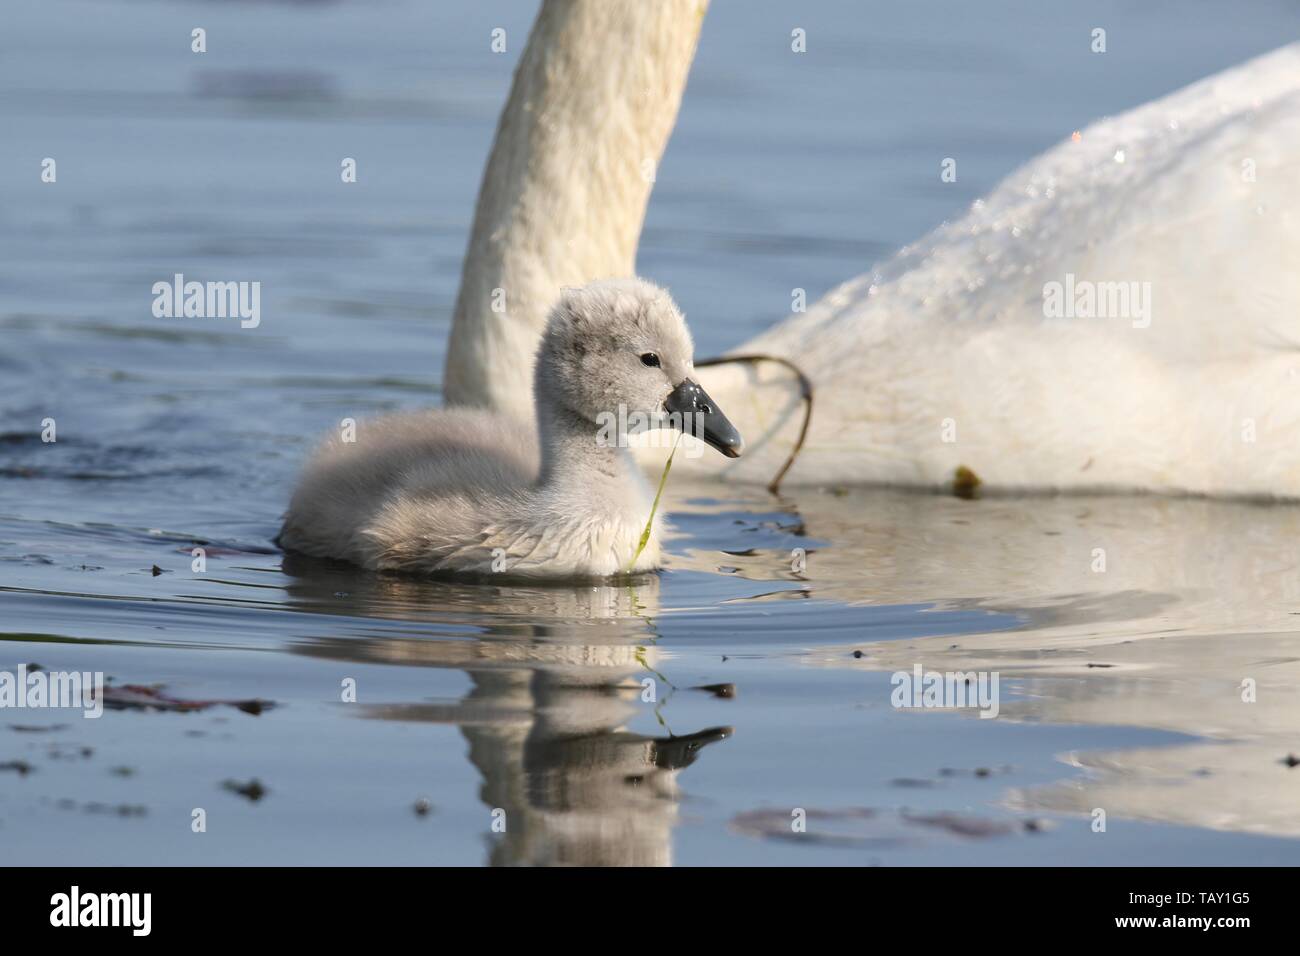 A mute swan Cygnus olor cygnet swimming close to the parent swan on a blue lake in Spring Stock Photo